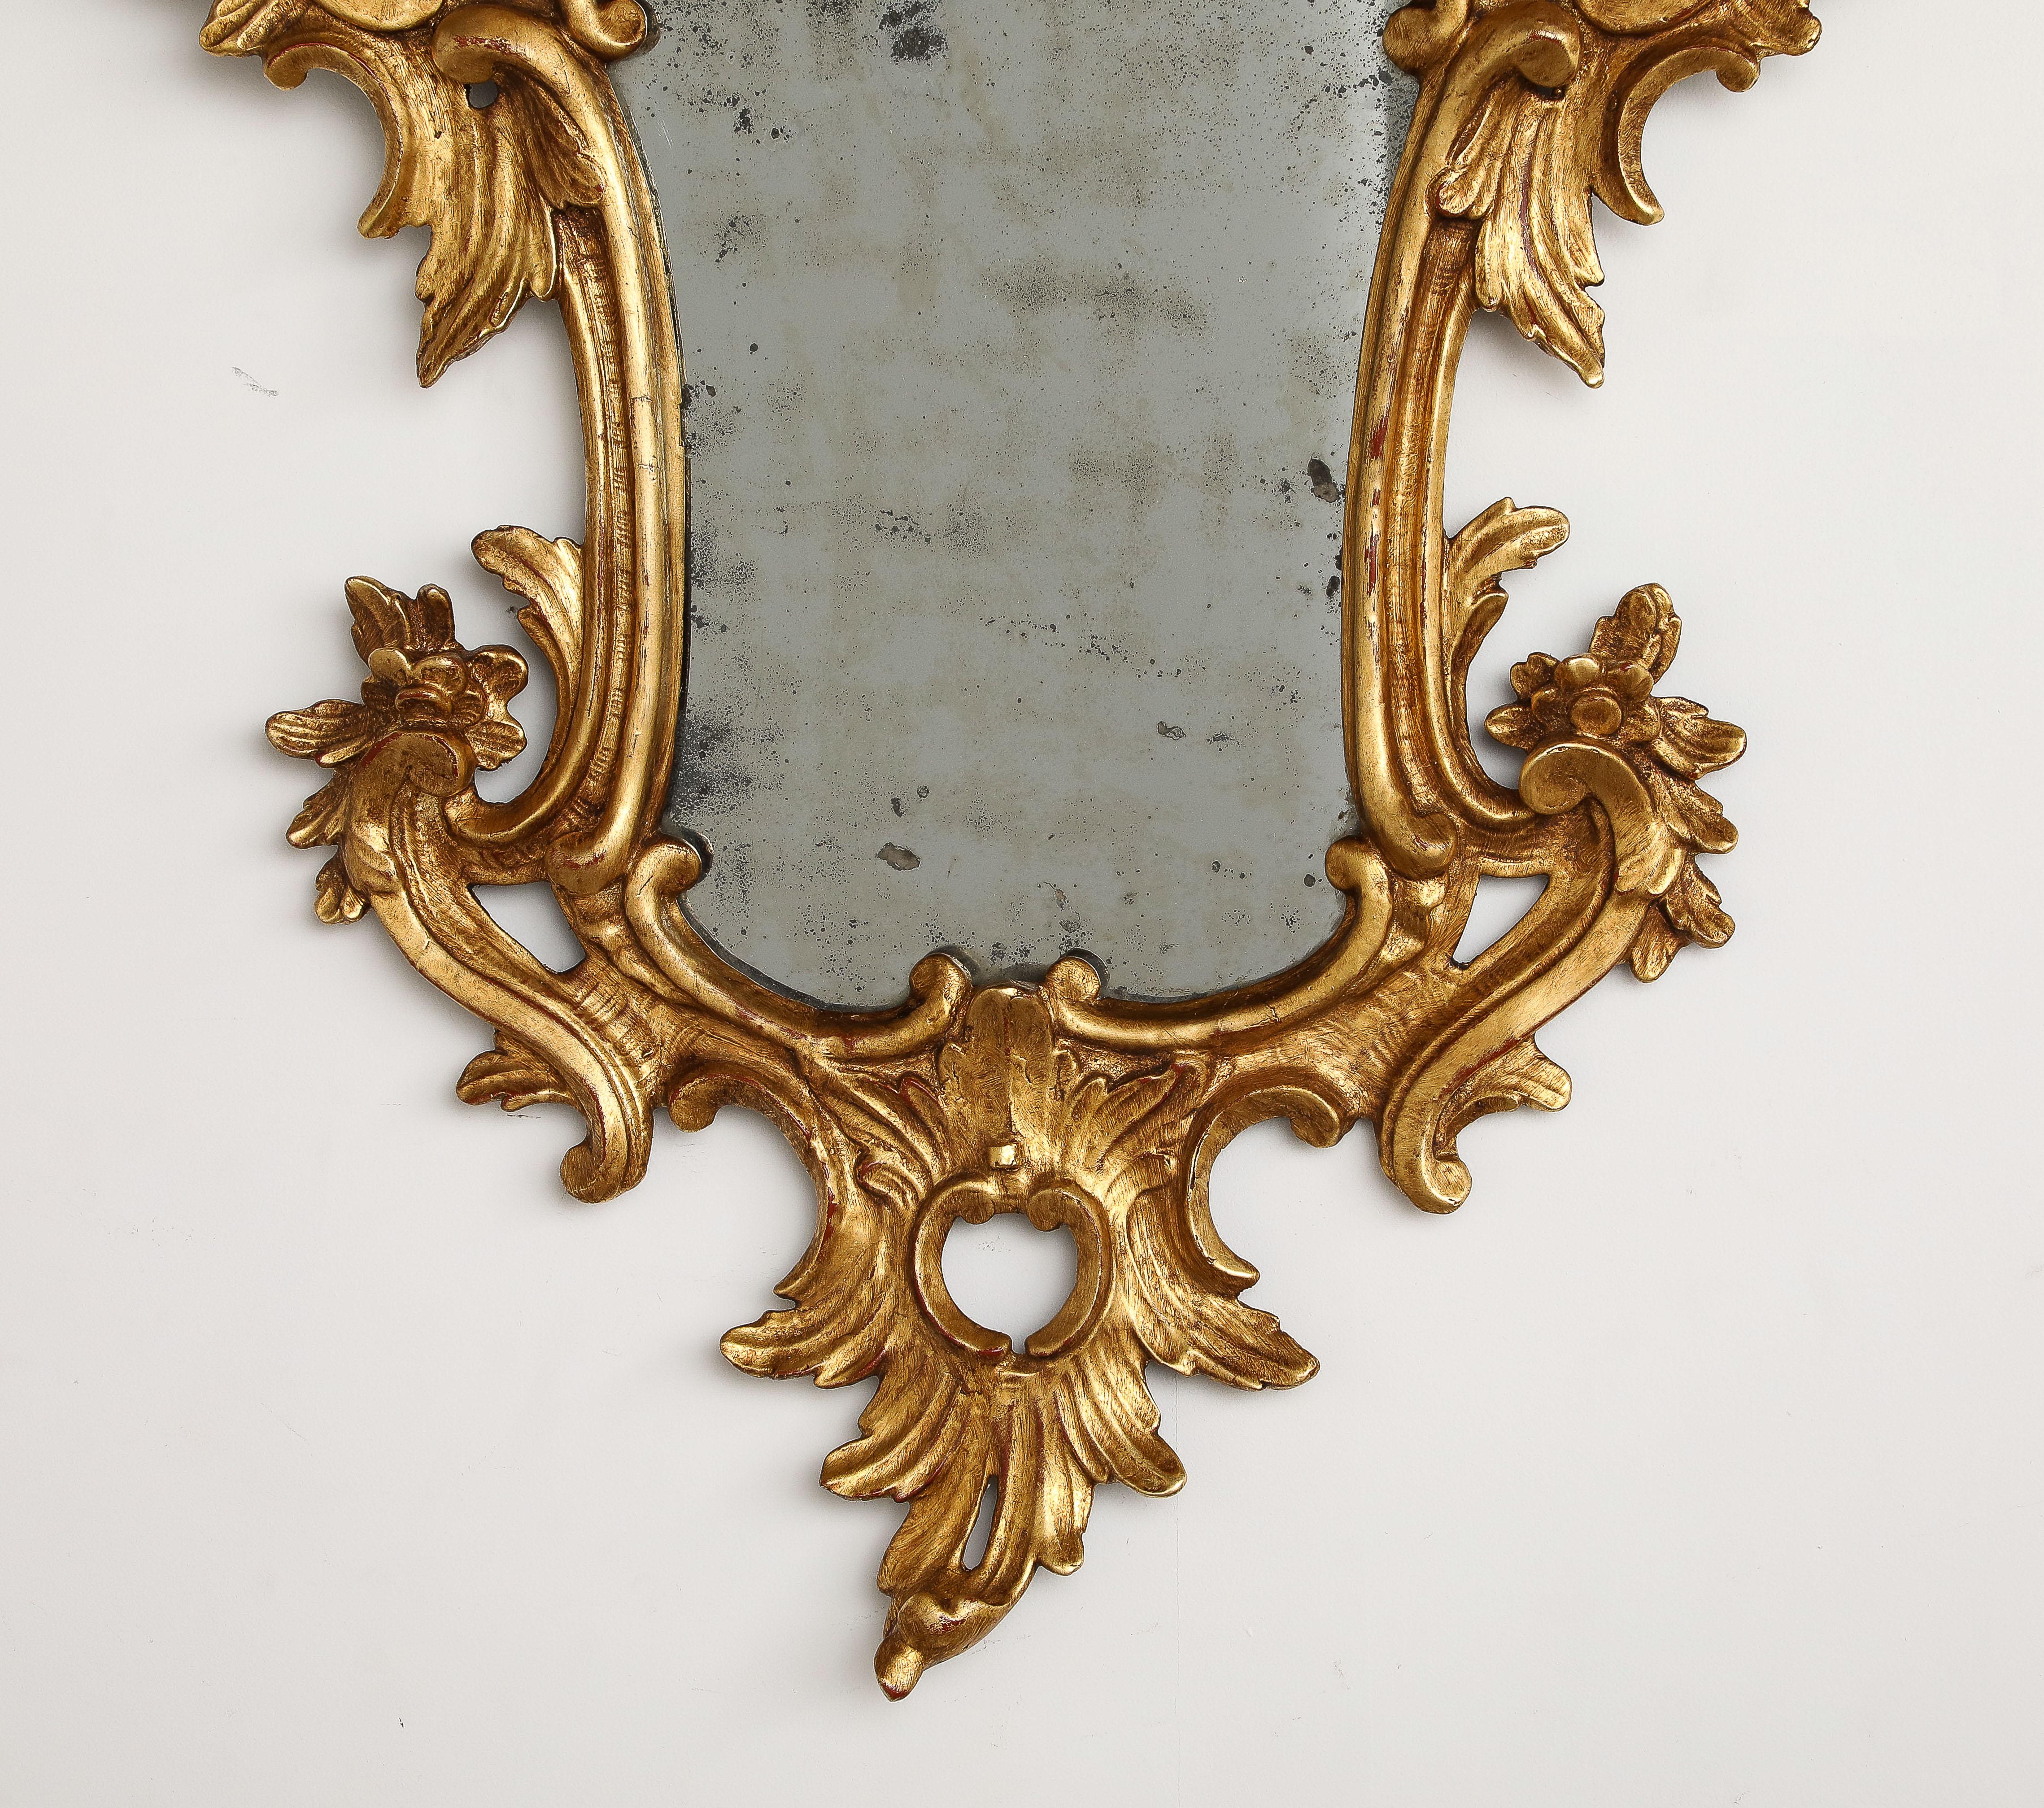 Pair of Italian Eighteenth Century Rococo Carved and Gilded Wood Mirrors For Sale 6